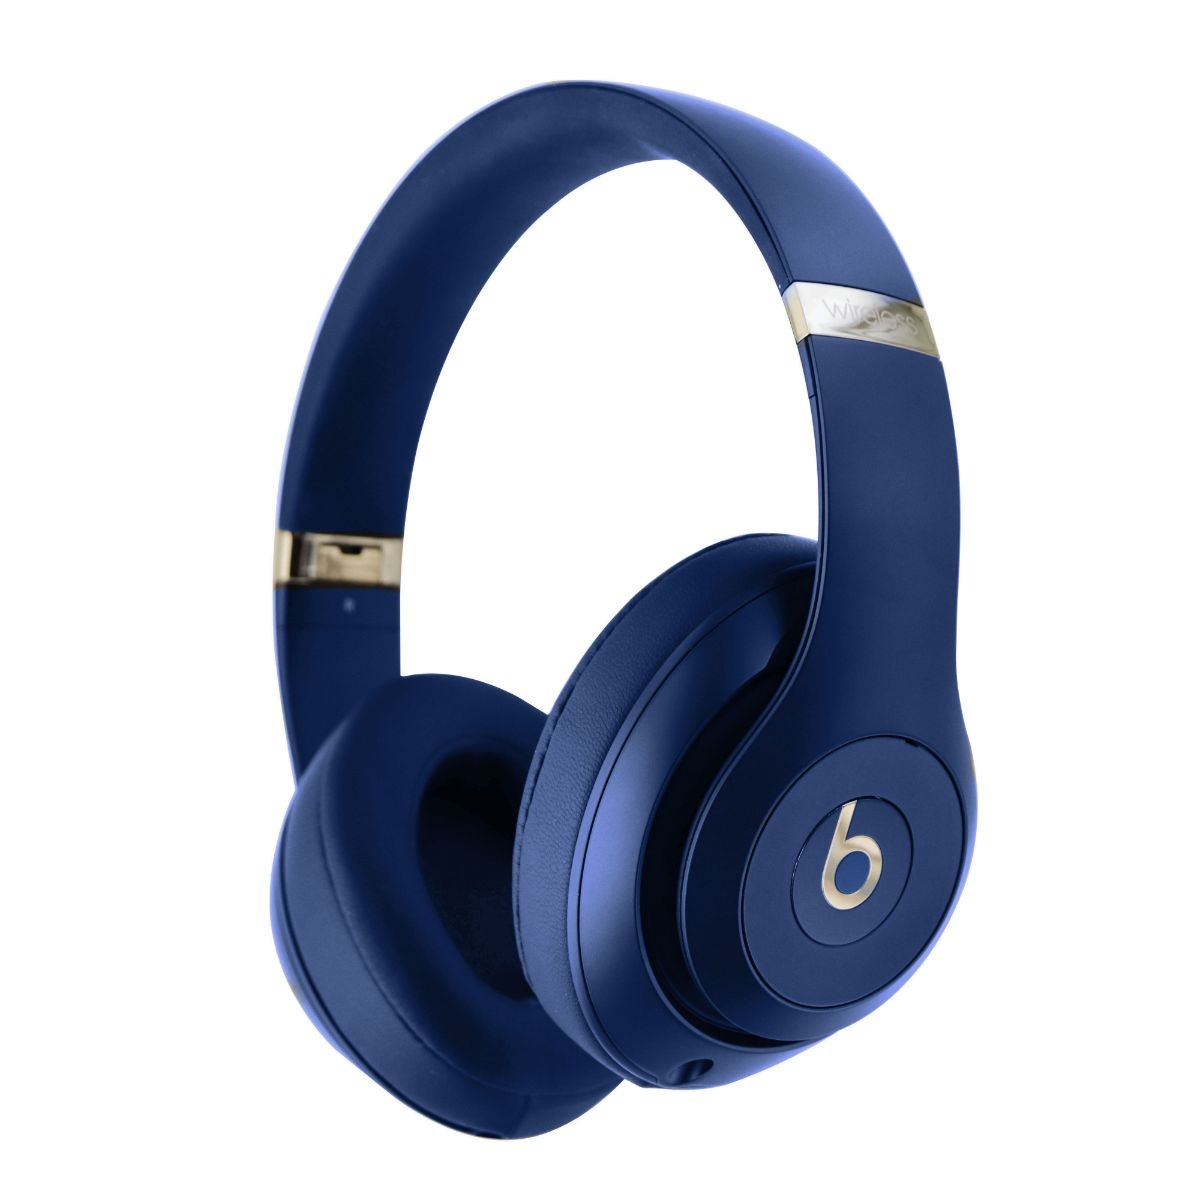 Beats by Dr. Dre Solo3 Wireless Headphones MQCY2LL/A Blue